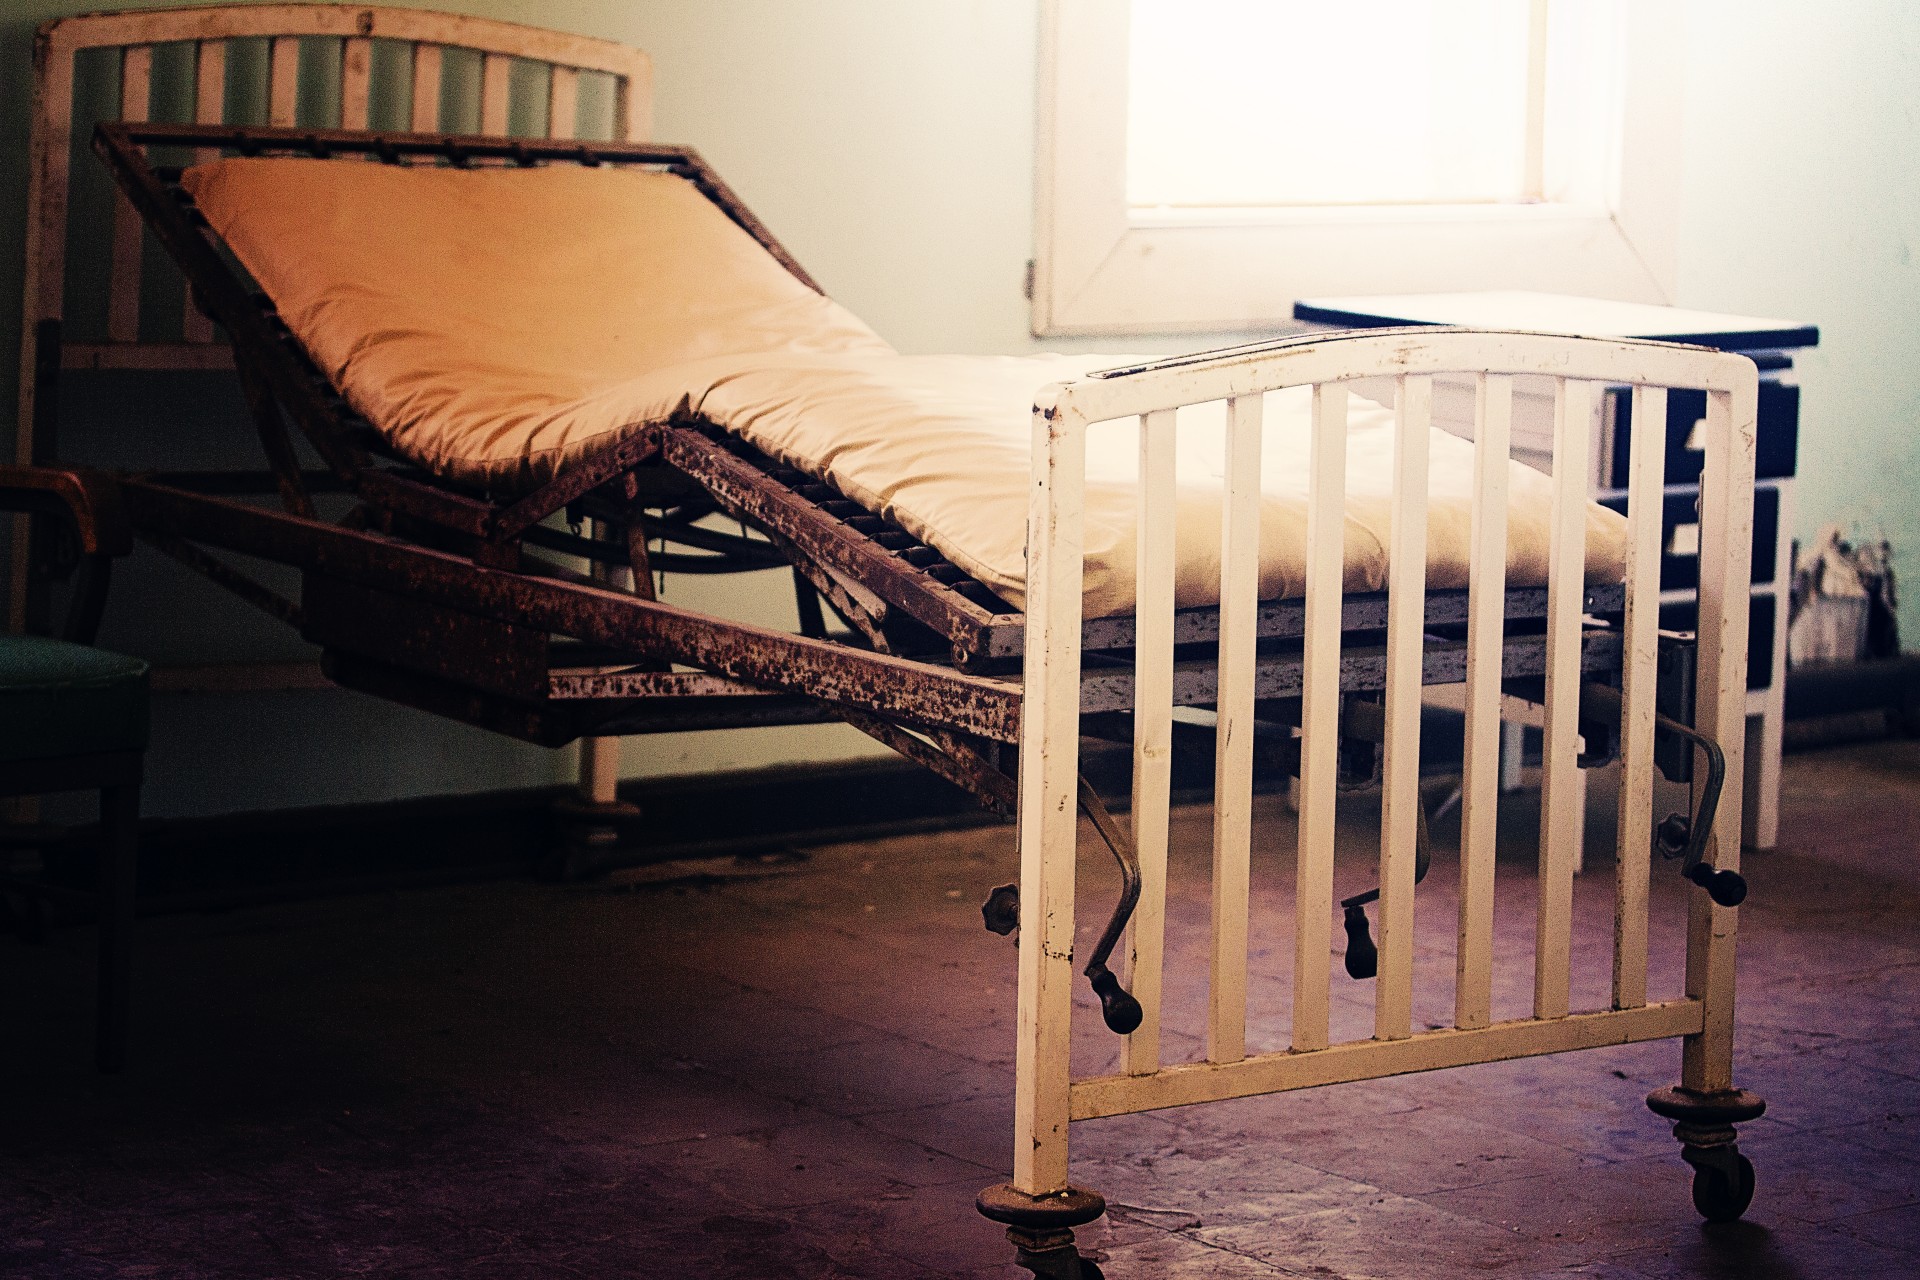 An old hospital bed in an abandoned building